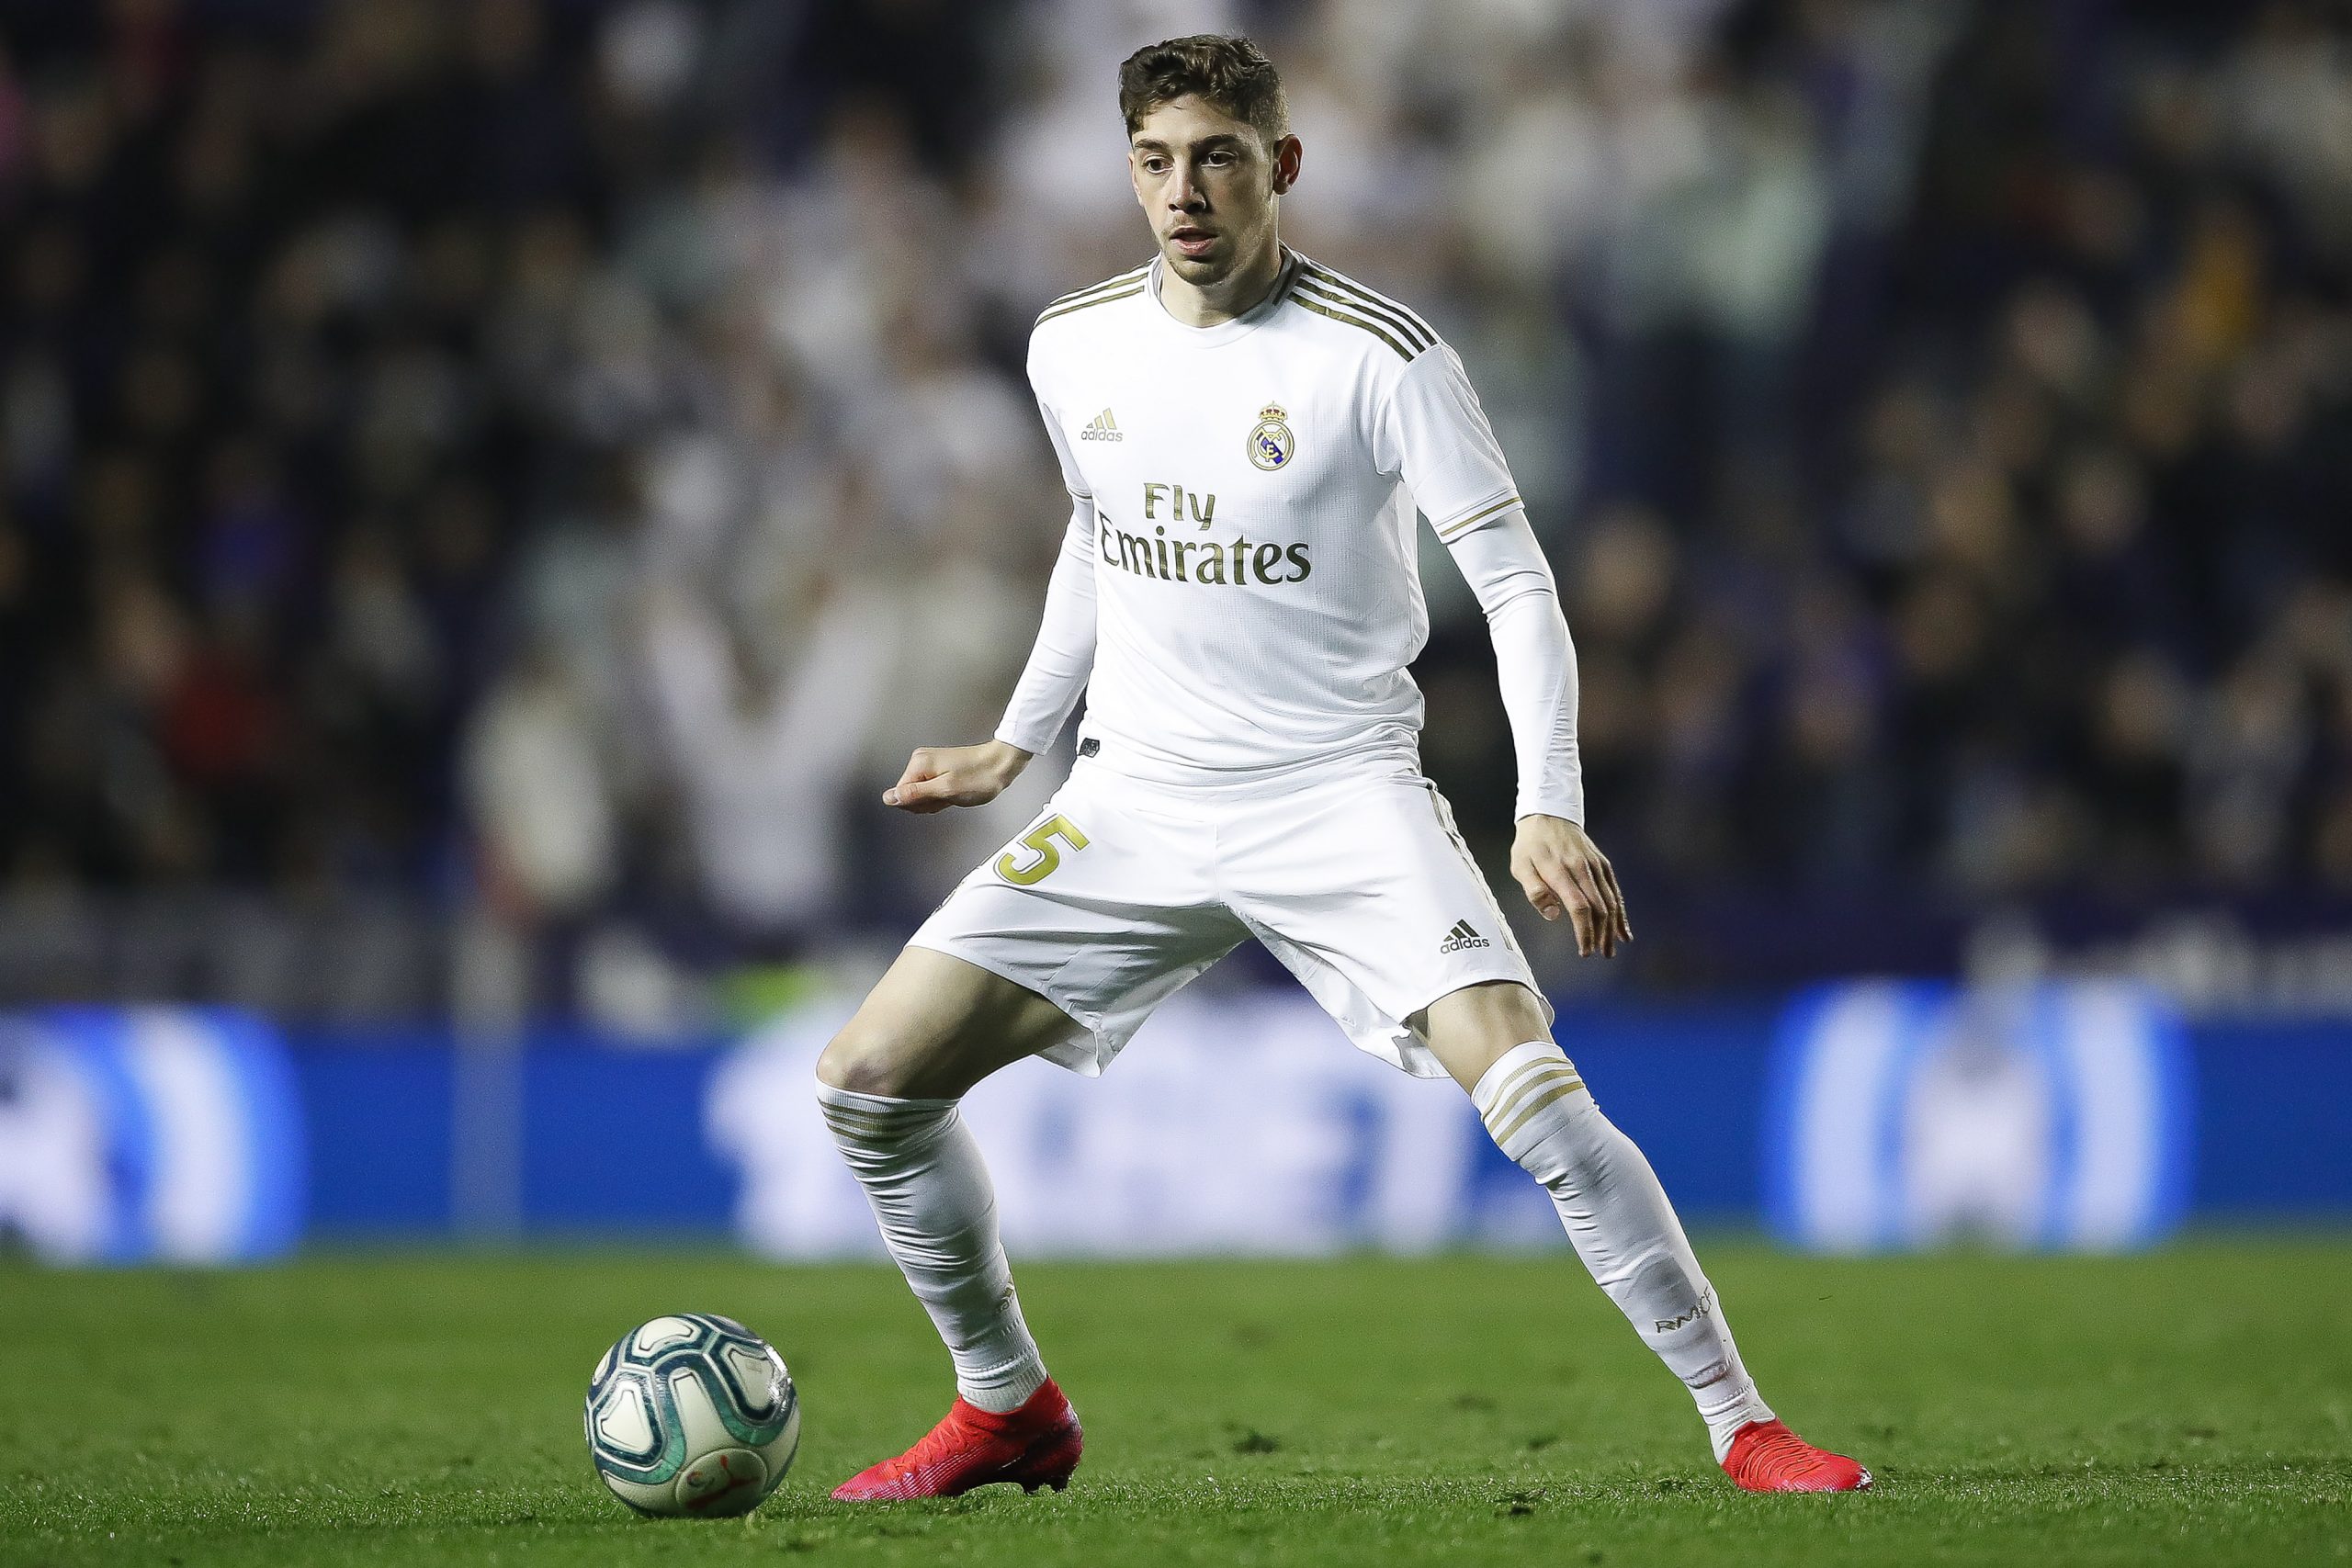 Federico Valverde is one of the players in Real Madrid, who has made his breakthrough this season.